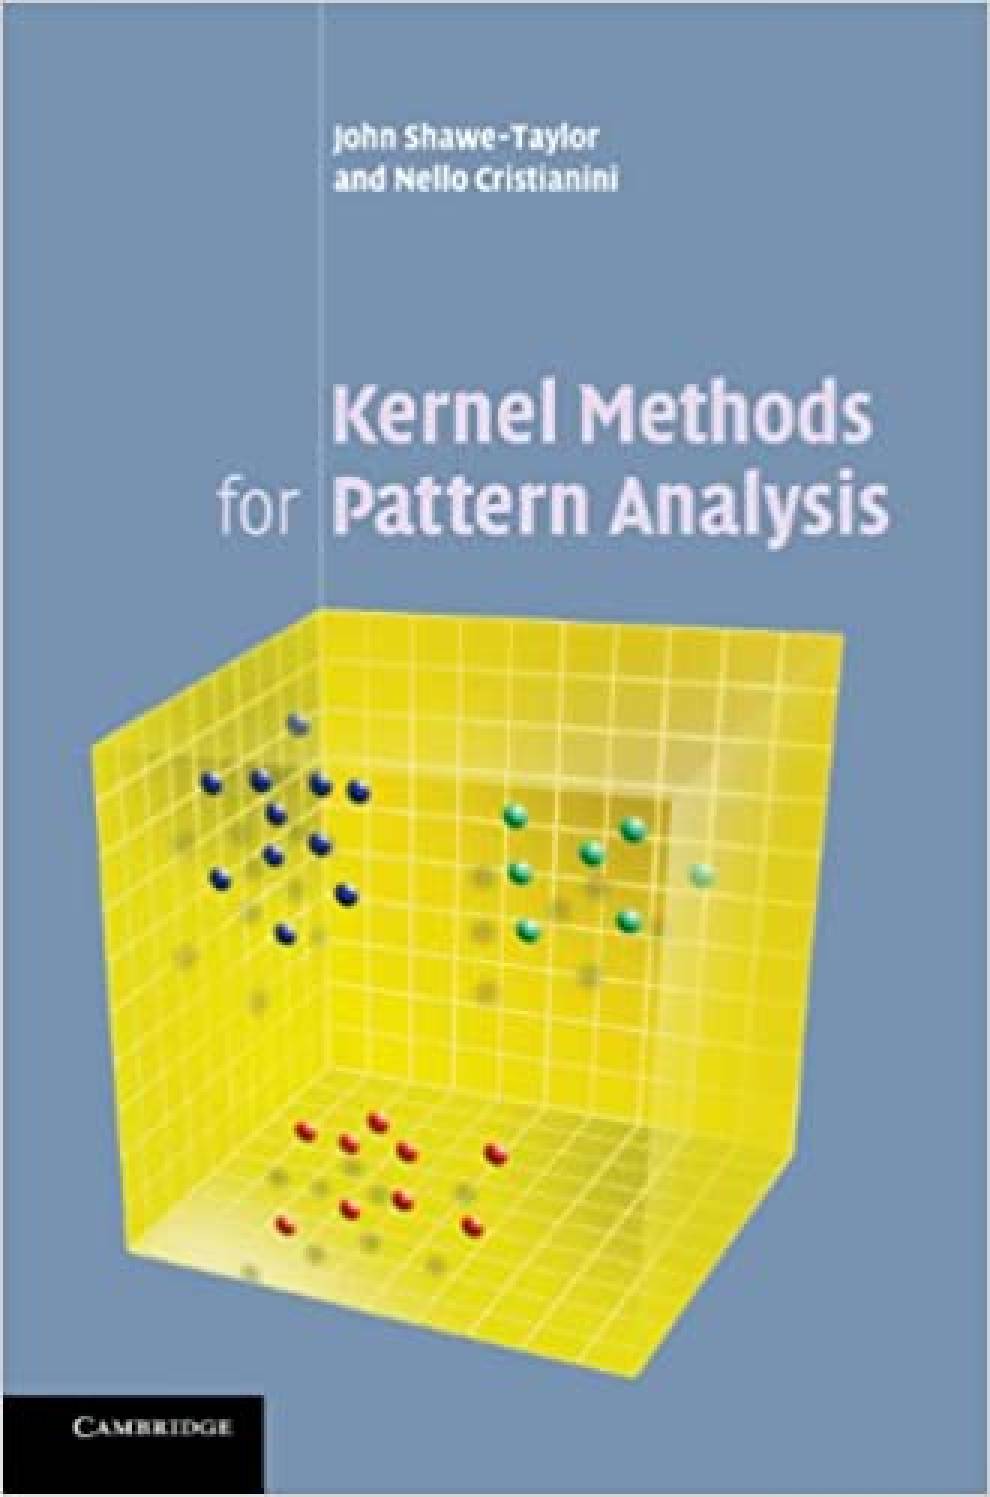 Kernel methods provide a powerful and unified framework for pattern discovery, motivating algorithms that can act on general types of data (e.g. strings, vectors or text) and look for general types of relations (e.g. rankings, classifications, regressions